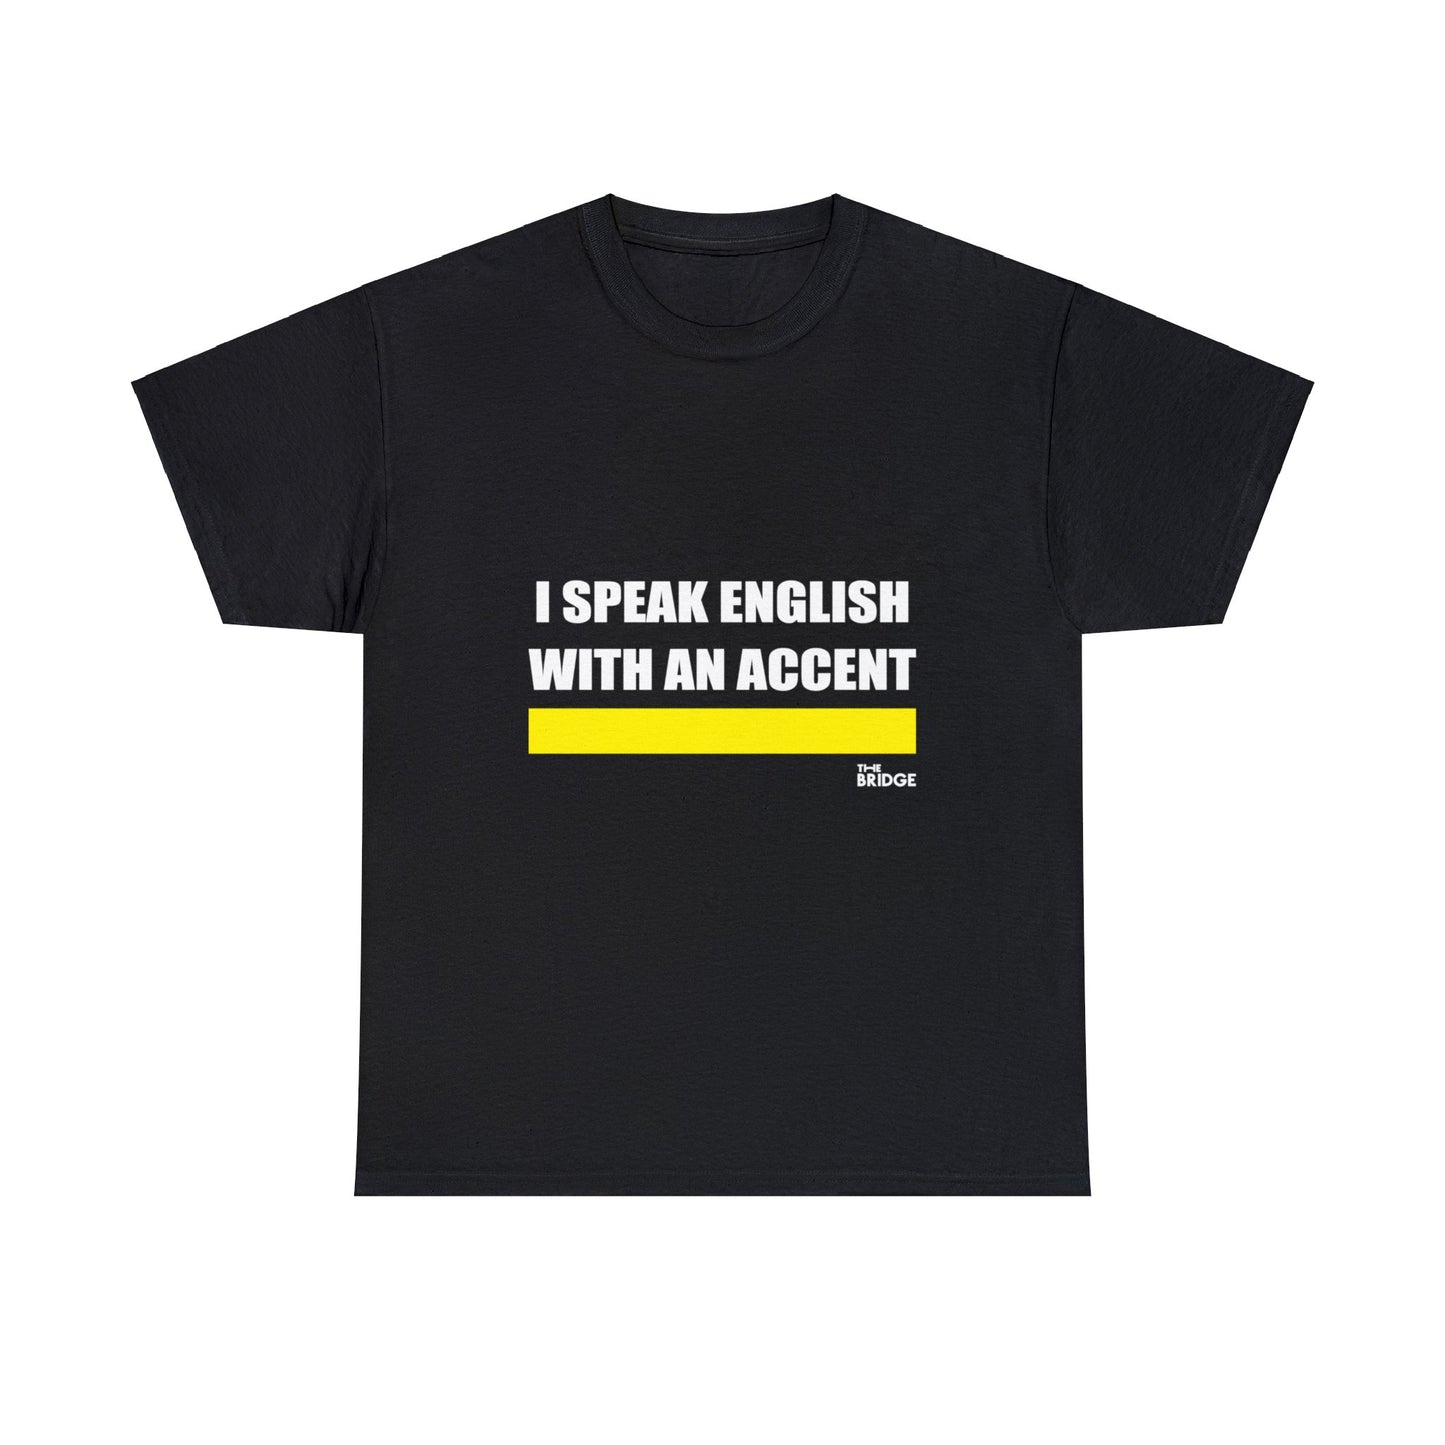 I SPEAK ENGLISH WITH AN ACCENT - BLACK T-SHIRT